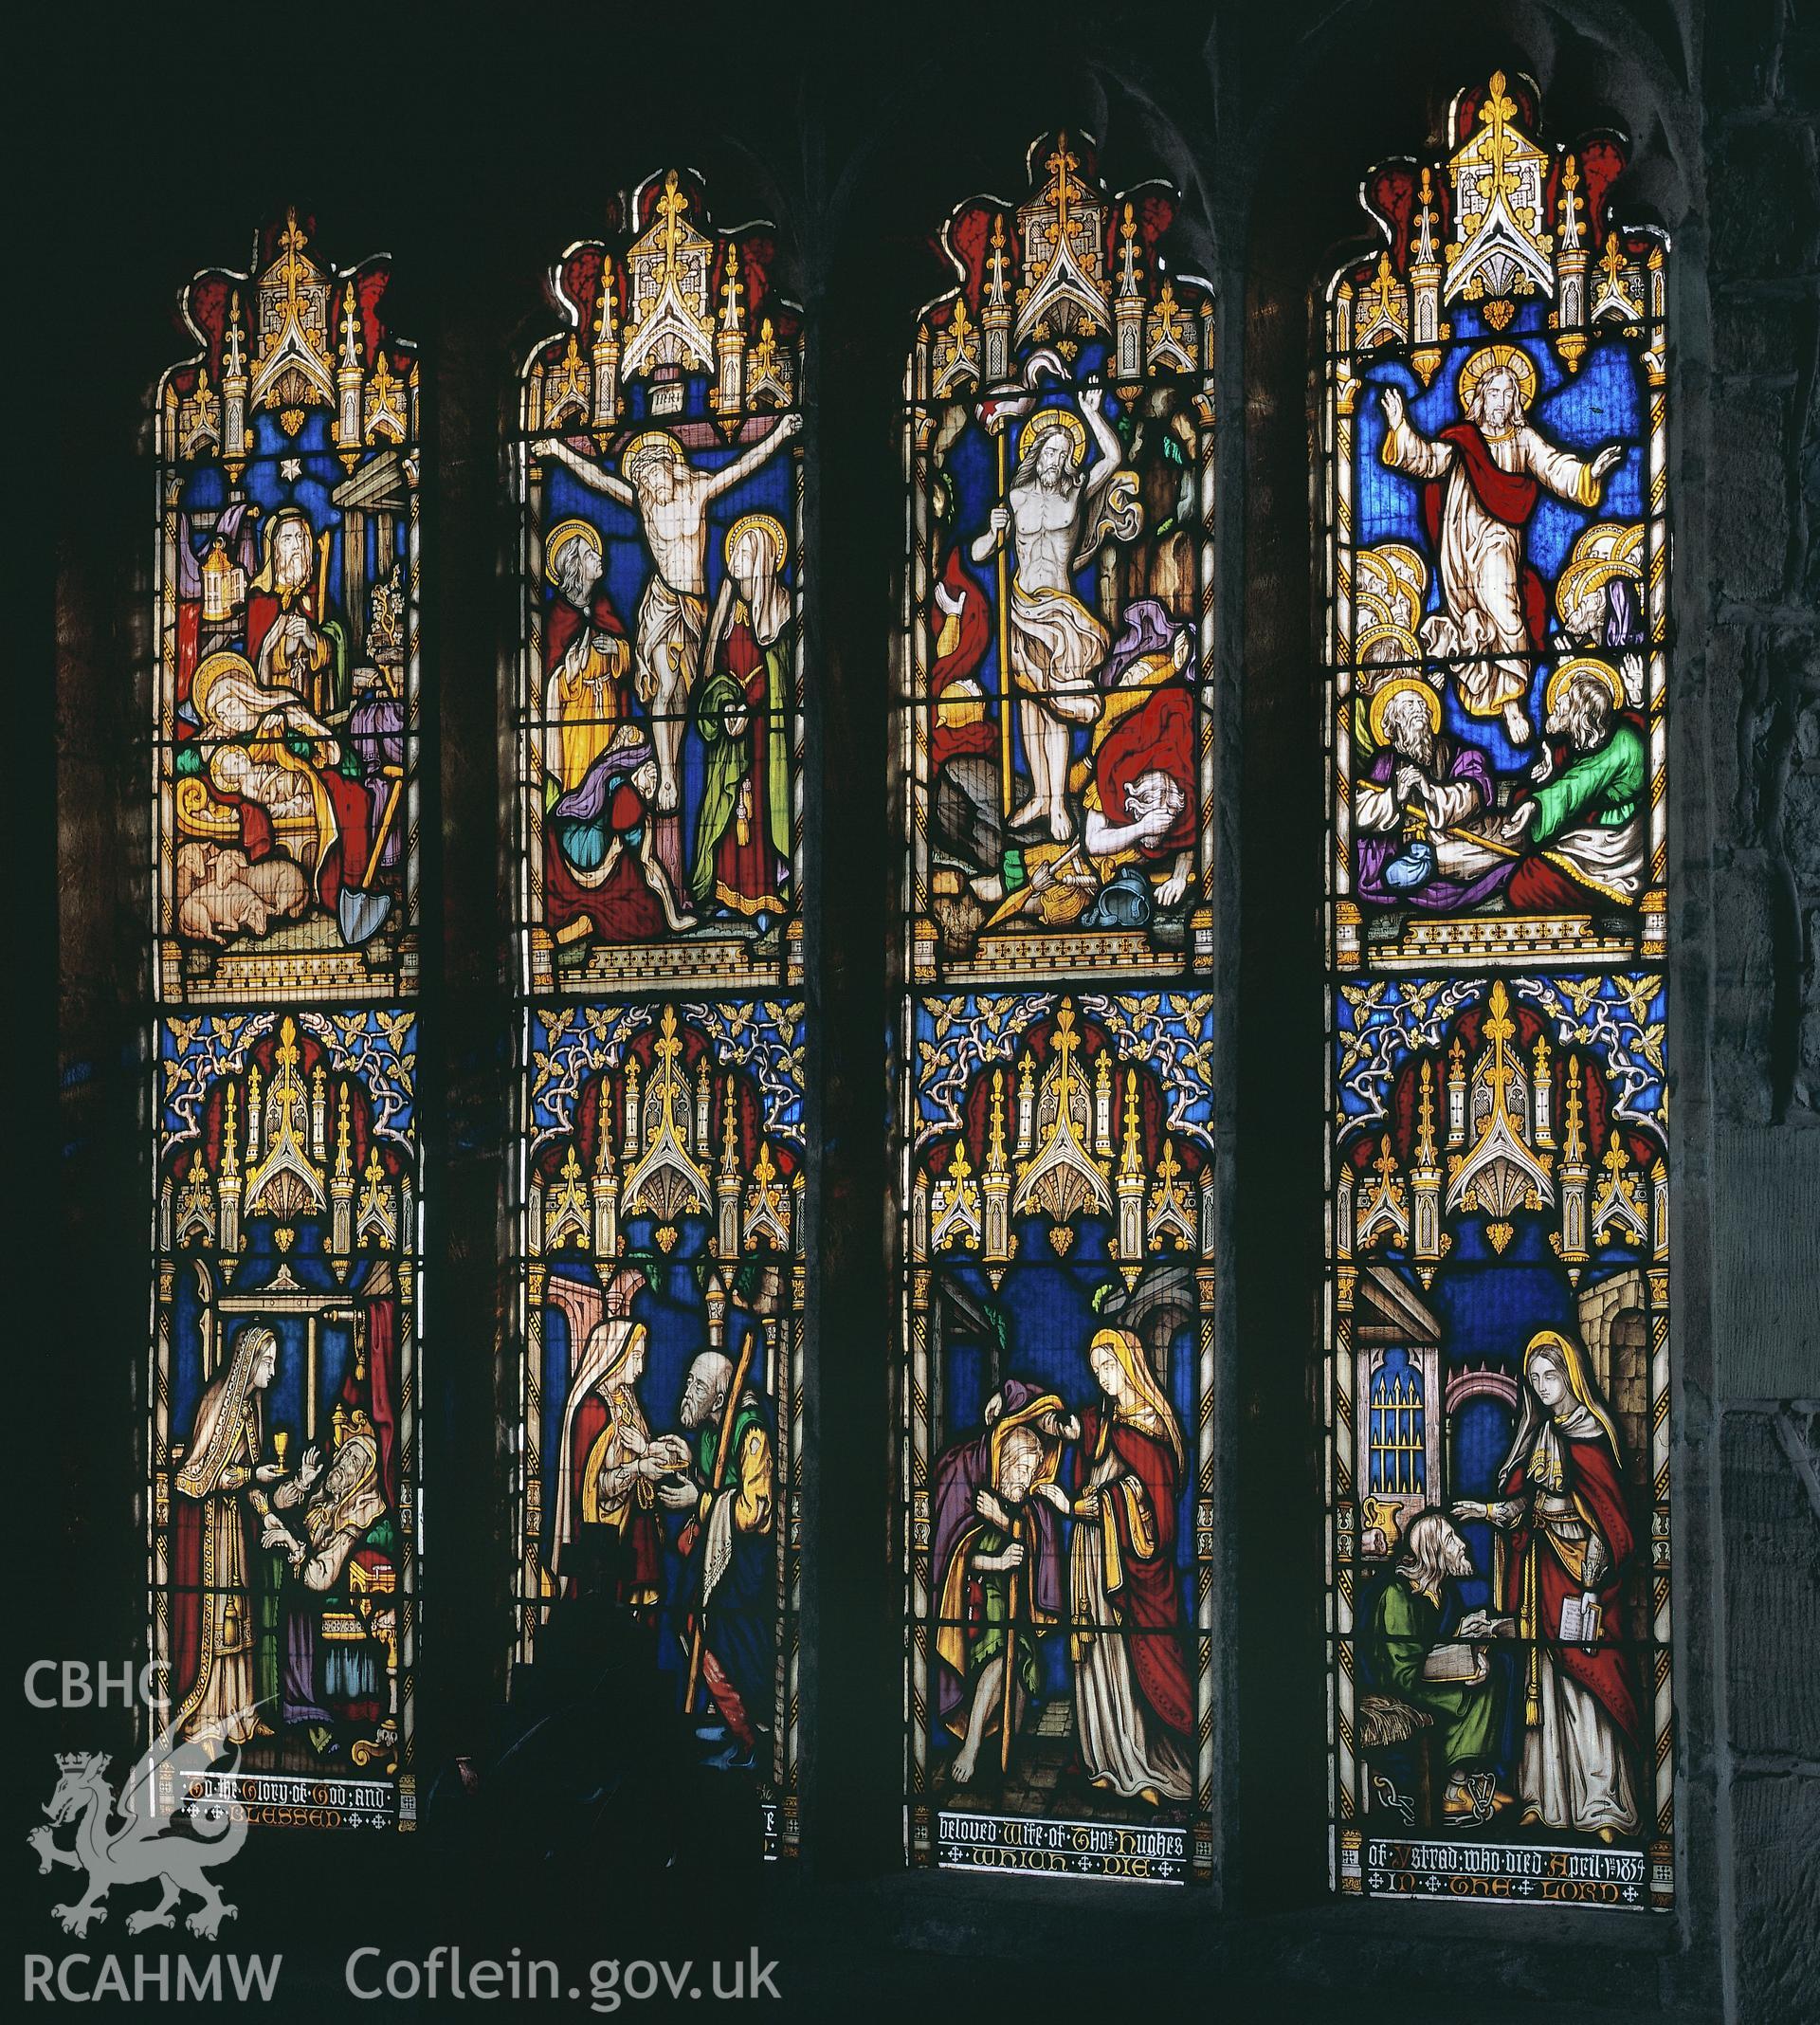 RCAHMW colour transparency of a stained glass window depicting scenes from the life of Christ  in St. Dyfnog's Church, Llanrhaeadr-yng-Nghinmeirch, by Fleur James, 1986.